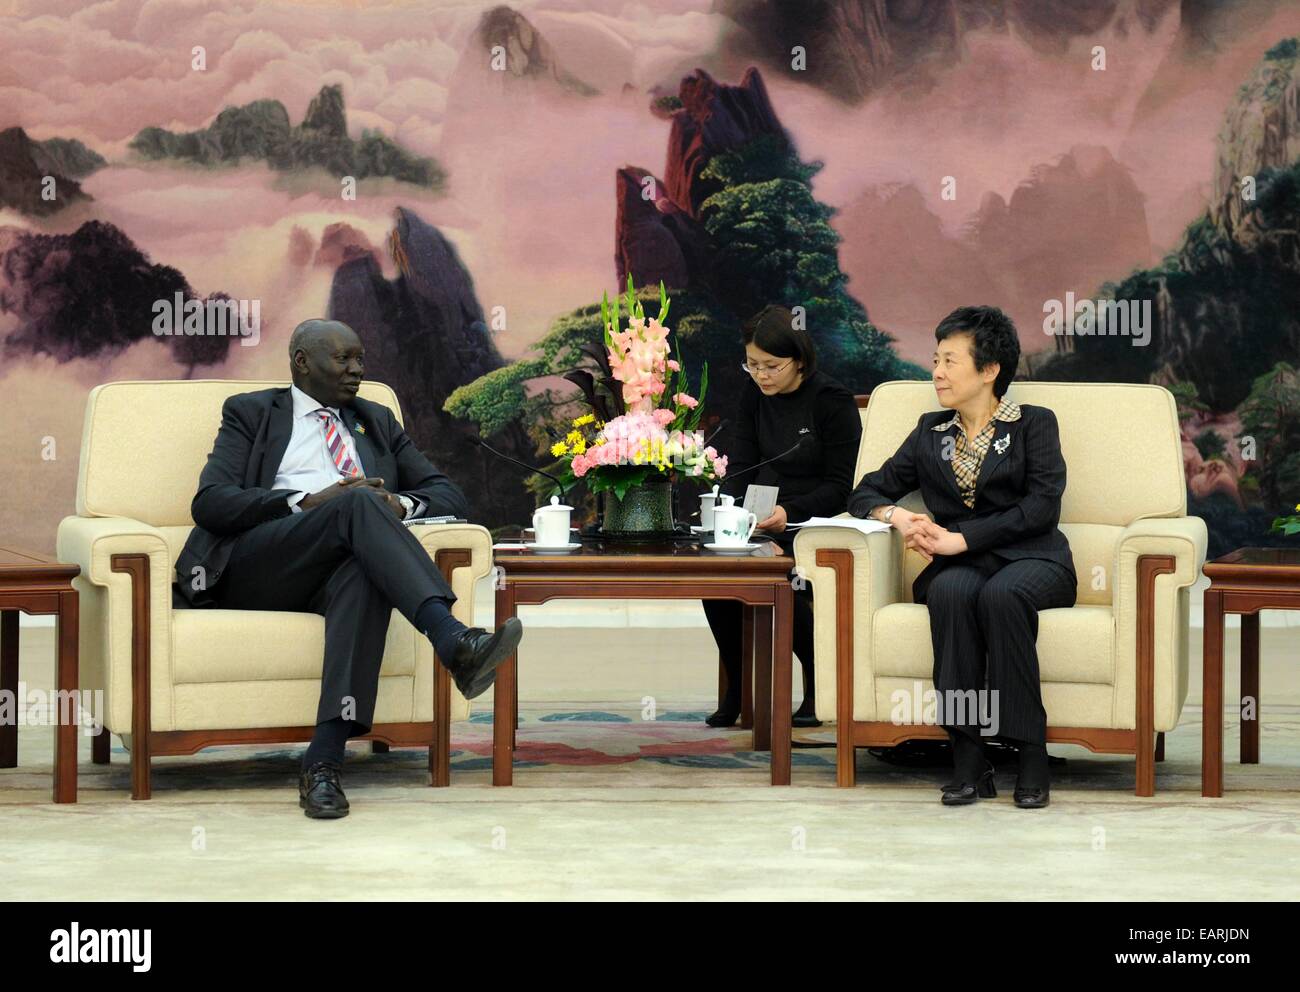 (141120) -- BEIJING, Nov. 20, 2014 (Xinhua) -- Yan Junqi (R), vice chairwoman of the Standing Committee of China's National People's Congress, meets with political bureau member of Sudan People's Liberation Movement (SPLM) Daniel Awet Akot, who is leading an SPLM senior official training program, in Beijing, China, Nov. 20, 2014. (Xinhua/Zhang Duo) (hdt) Stock Photo